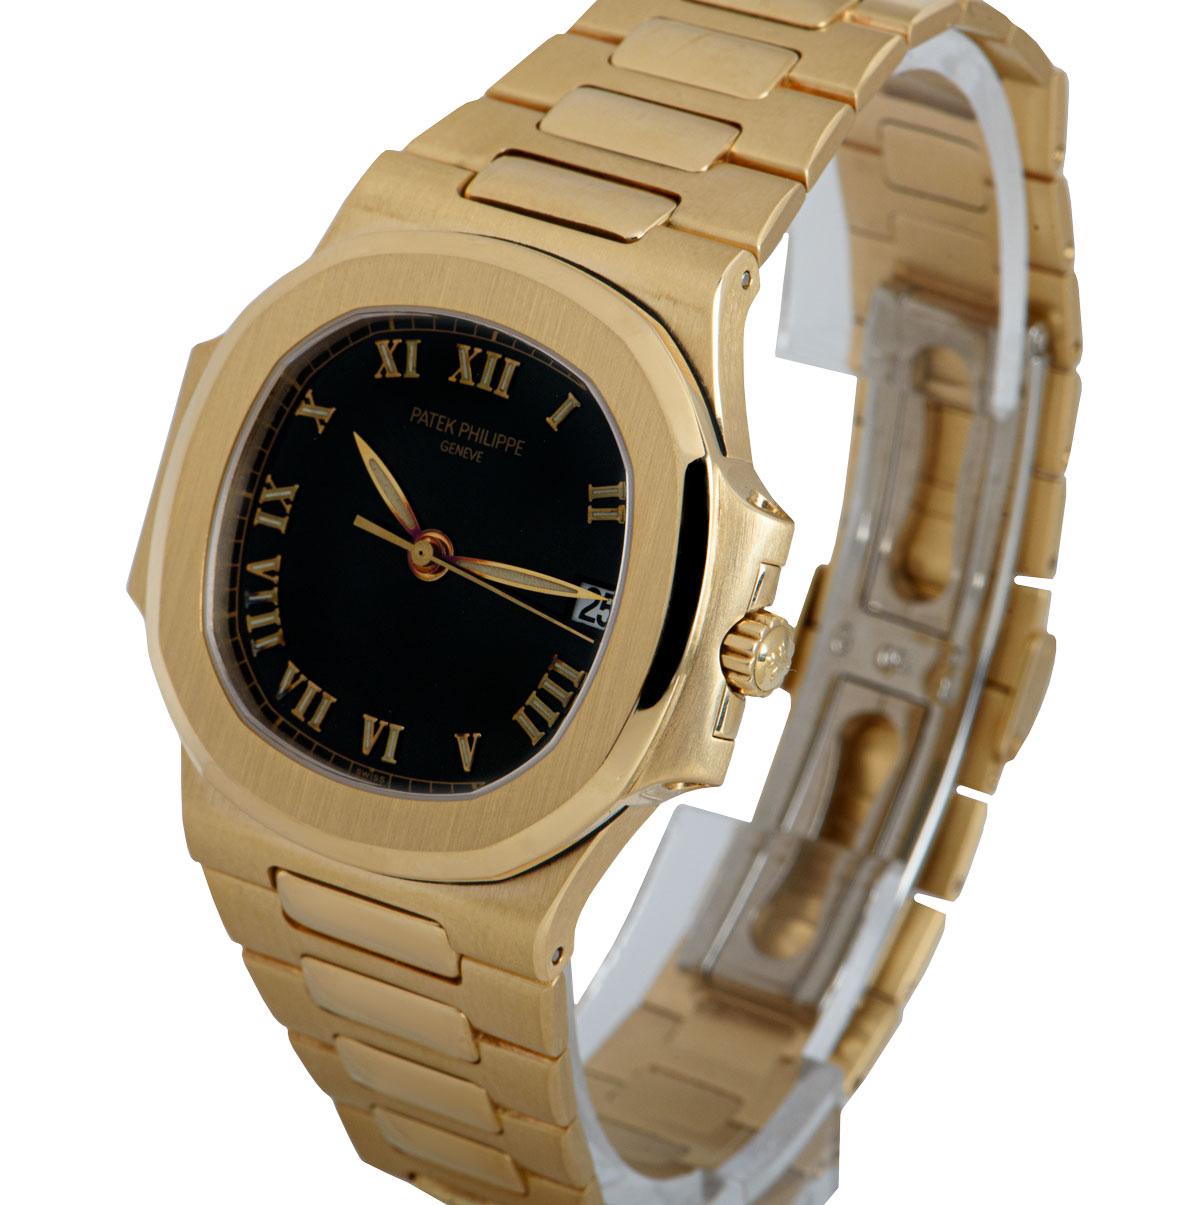 A 37 mm 18k Yellow Gold Nautilus Gents Wristwatch, semi-glossy black dial with applied roman numerals, date at 3 0'clock, a fixed 18k yellow gold bezel, an 18k yellow gold bracelet with a concealed 18k white gold double deployant clasp, sapphire